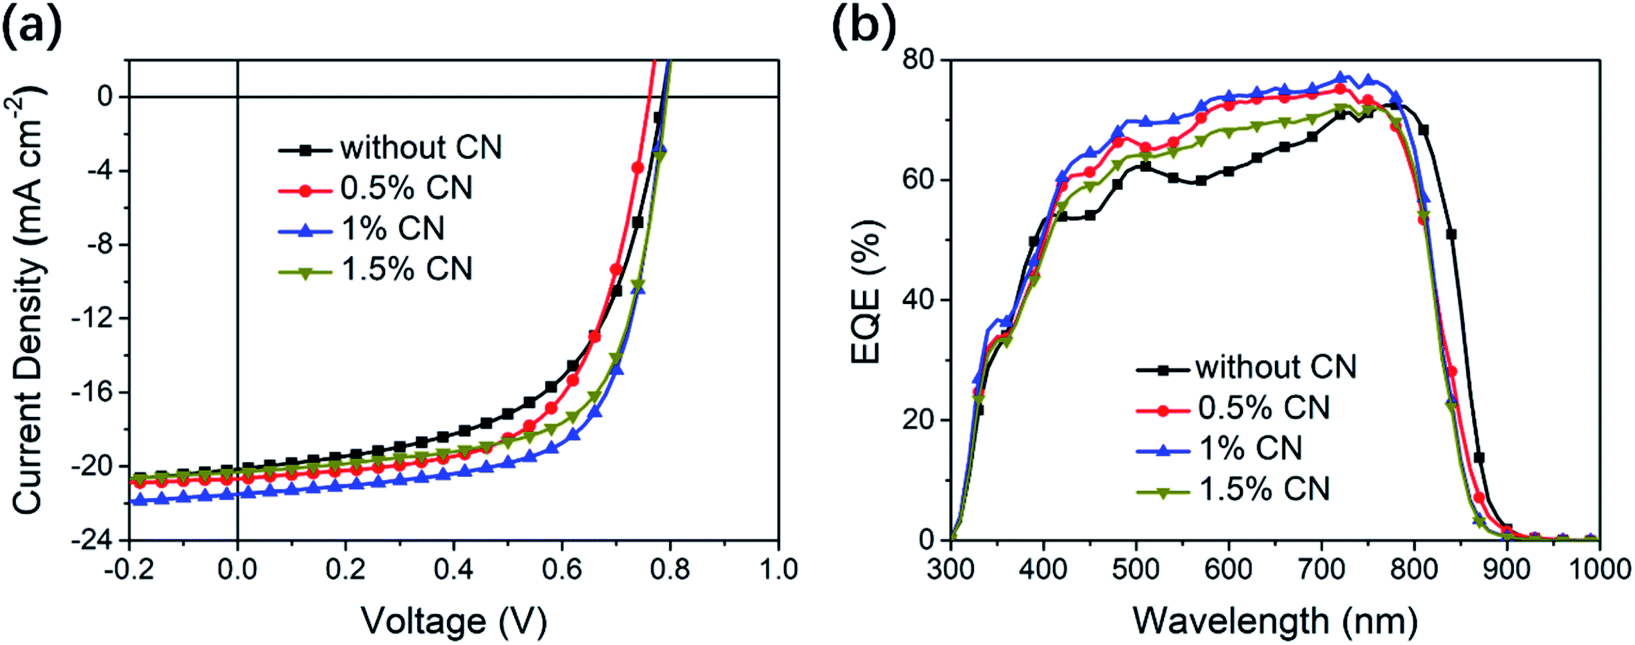 The Role Of Connectivity In Significant Bandgap Narrowing For Fused Pyrene Based Non Fullerene Acceptors Toward High Efficiency Organic Solar Cells Journal Of Materials Chemistry A Rsc Publishing Doi 10 1039 D0ta00520g